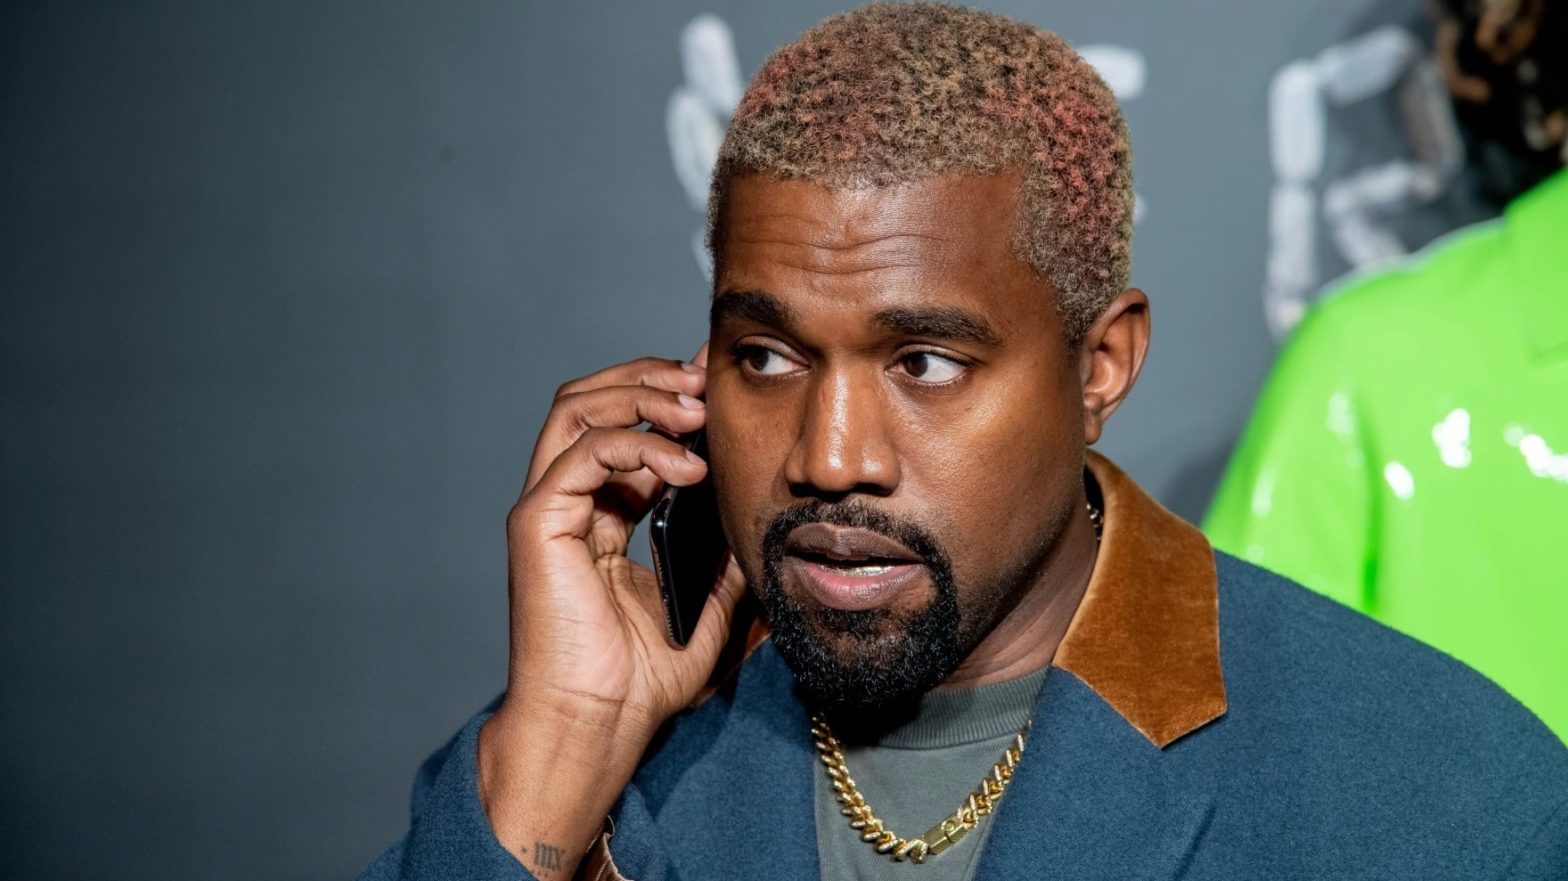 Kanye West Says He's Leaving Corporate America And Cutting Ties With Gap And adidas Once Contracts End — 'It's Time For Me To Go [At] It Alone'